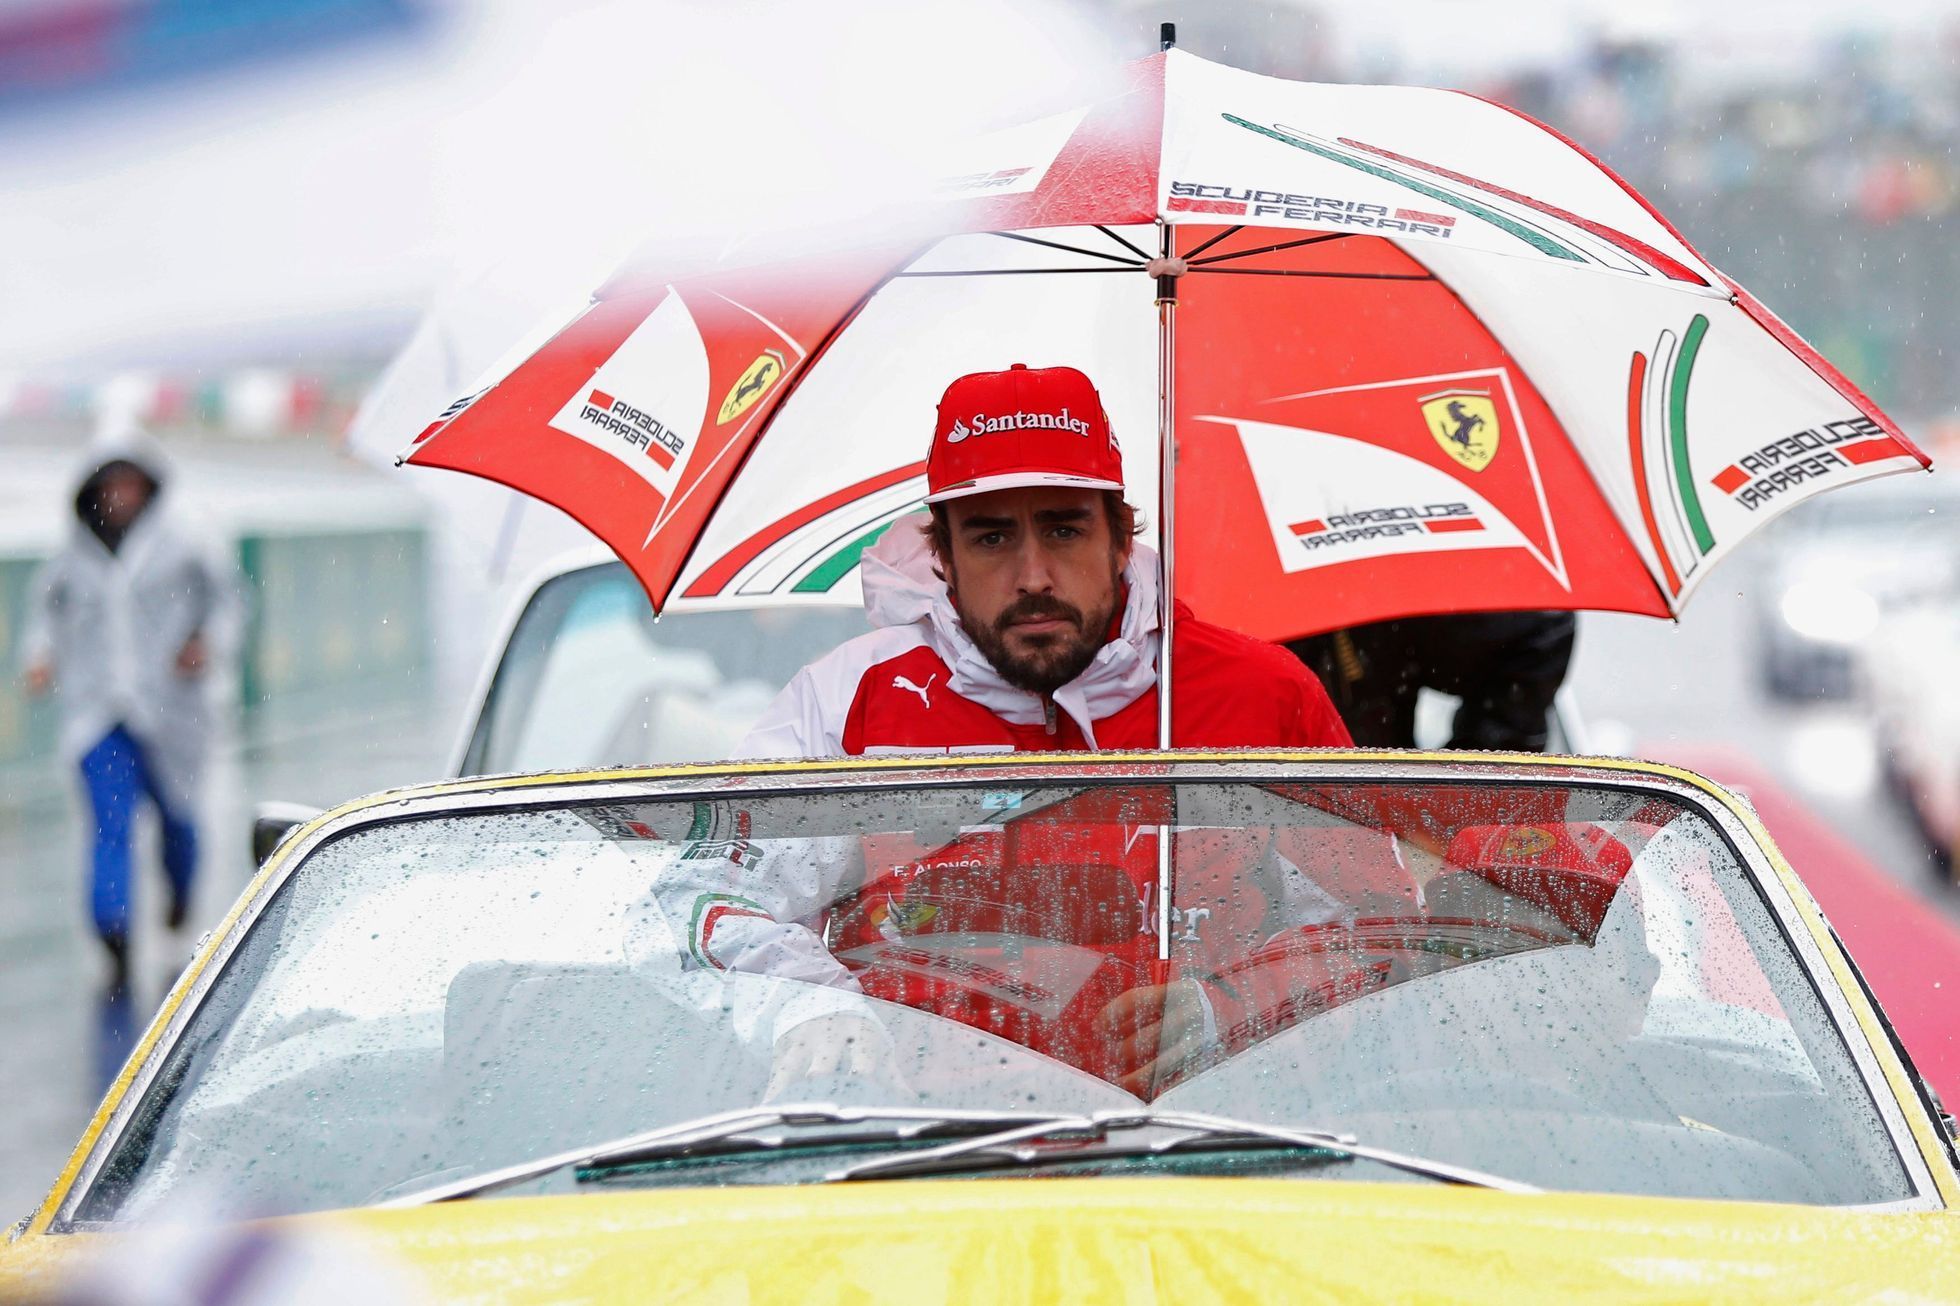 Ferrari Formula One driver Fernando Alonso of Spain sits under an umbrella during the drivers' parade ahead of the Japanese F1 Grand Prix at the Suzuka Circuit